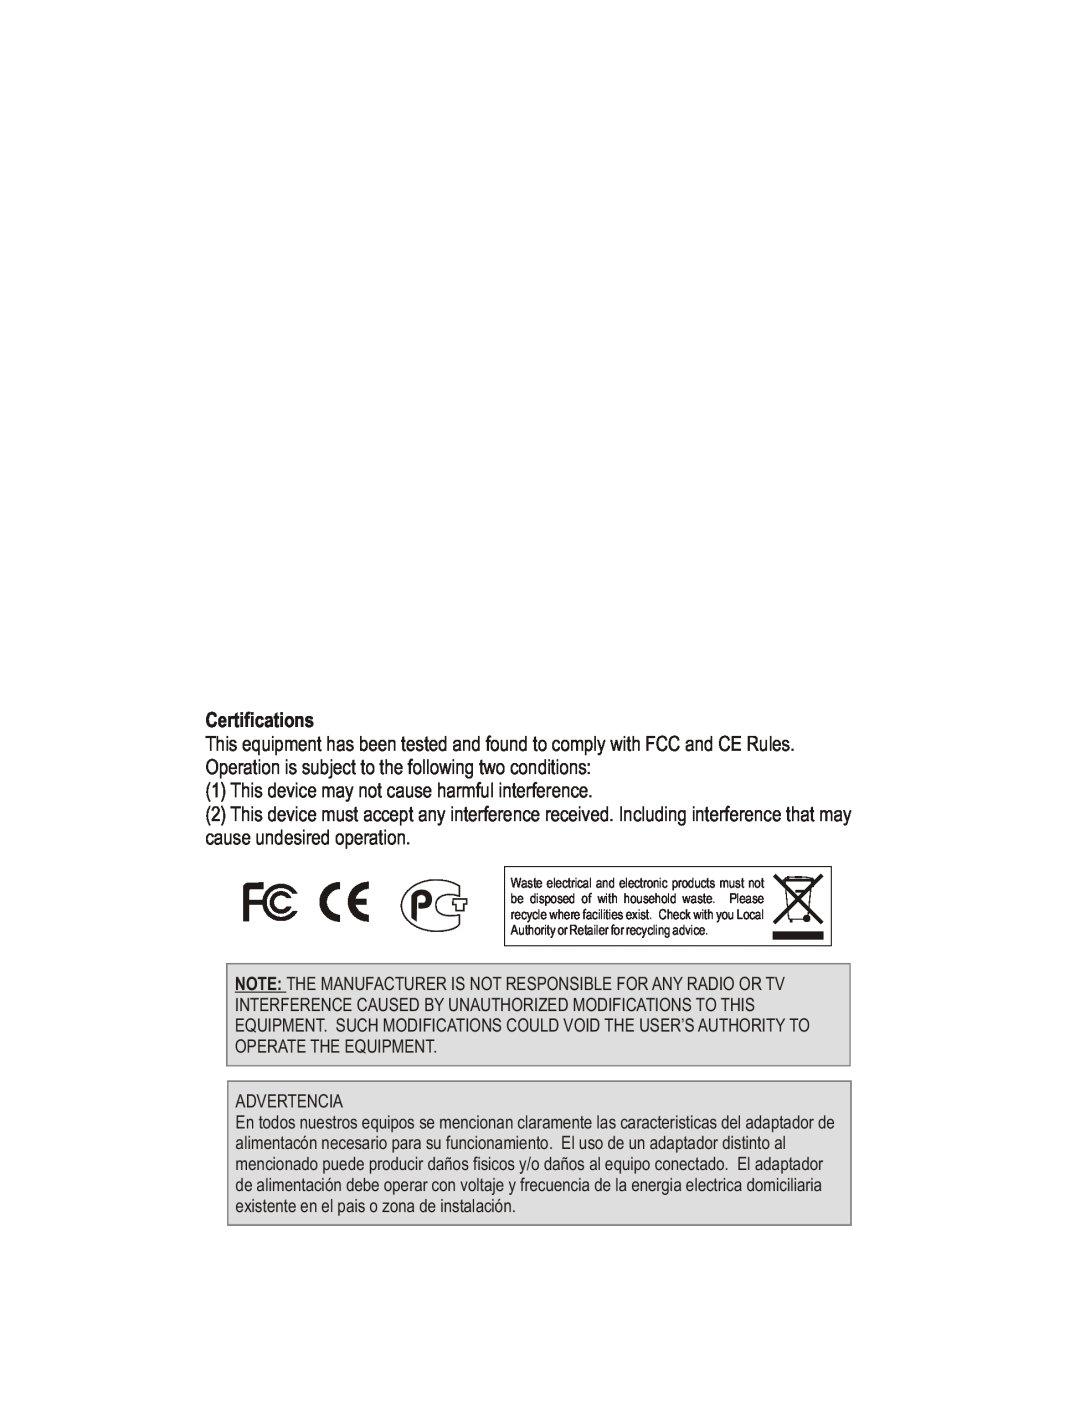 TRENDnet TK-401R manual This device may not cause harmful interference 